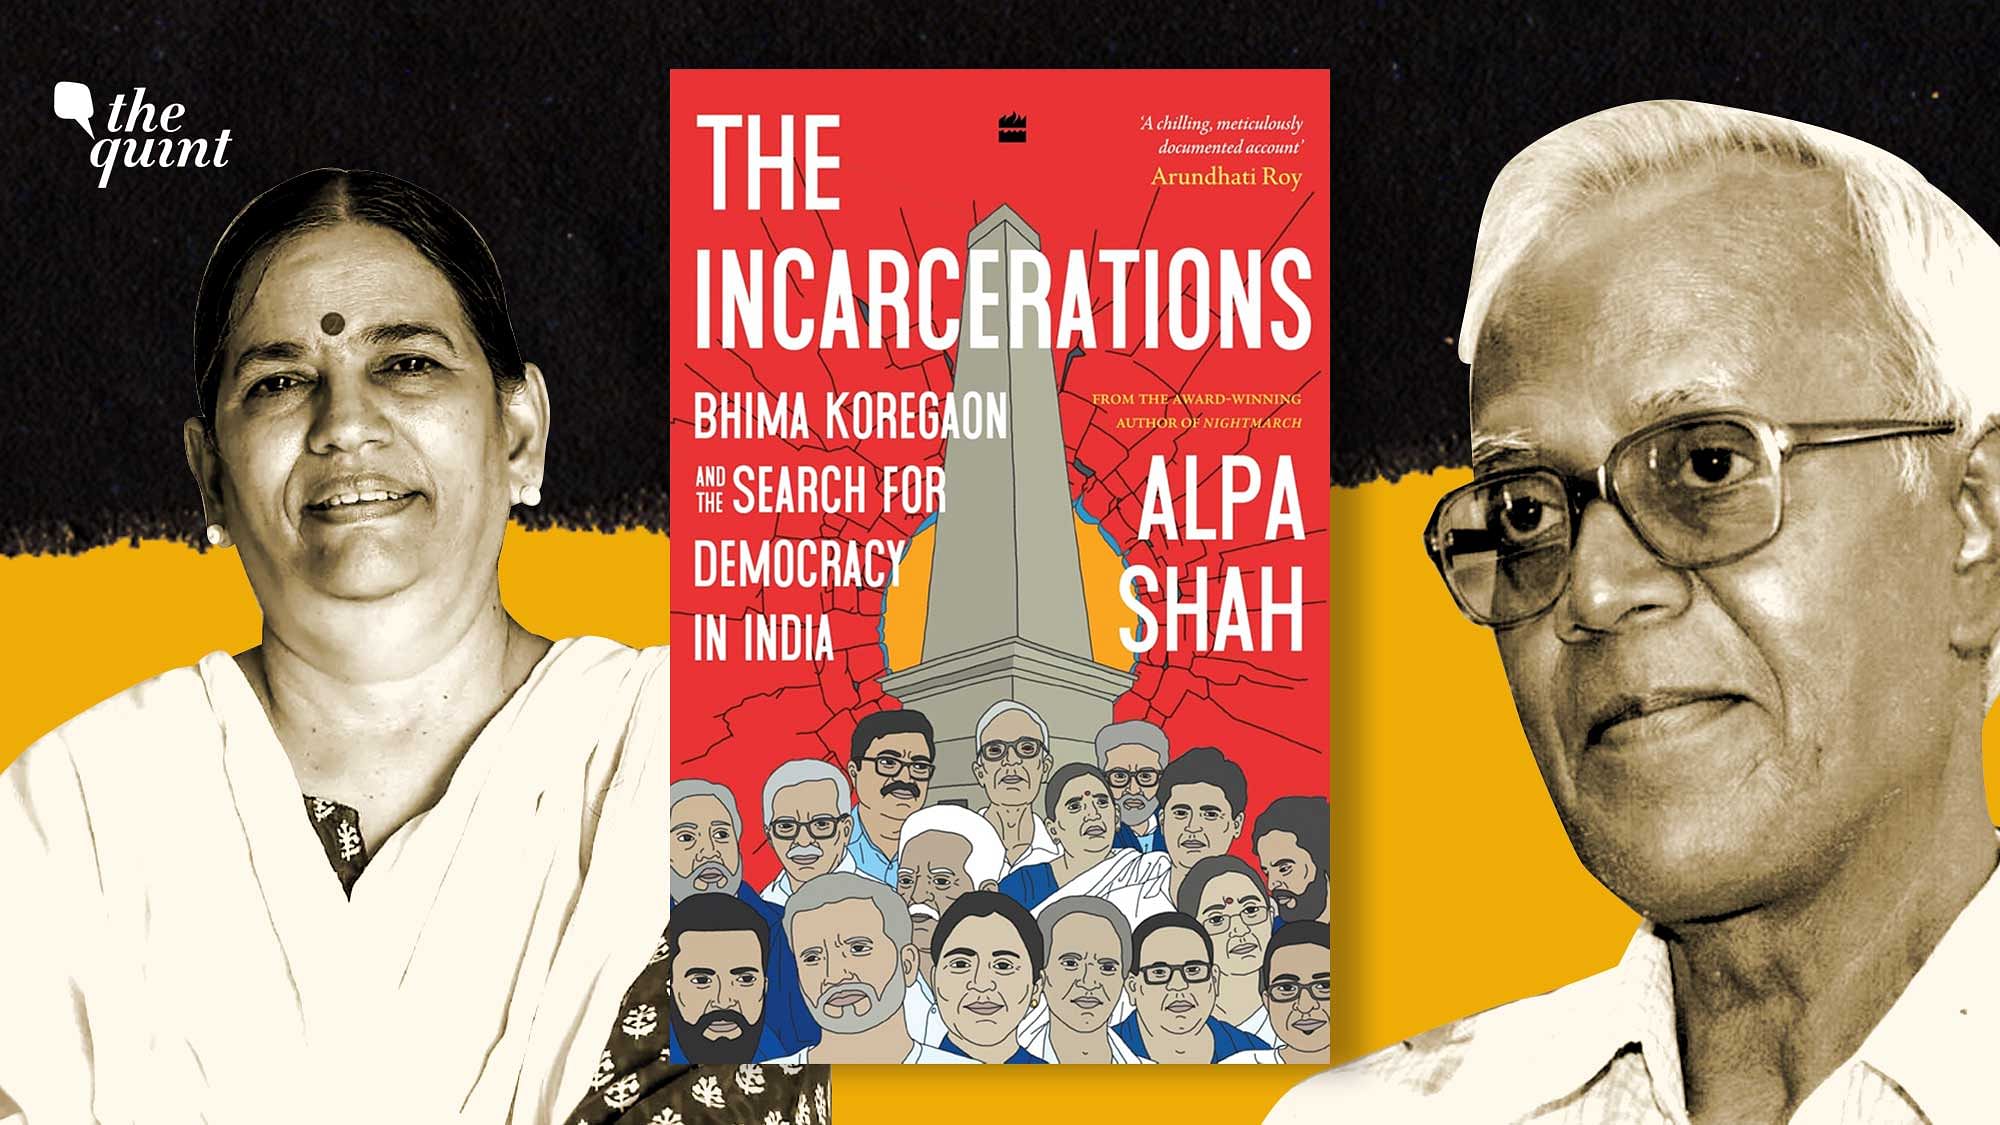 <div class="paragraphs"><p>As Shah notes, many of the under-trials in the Bhima Koregaon case did not even know each other, prior to their arrests under India's stringent Unlawful Activities Prevention Act (UAPA).</p></div>